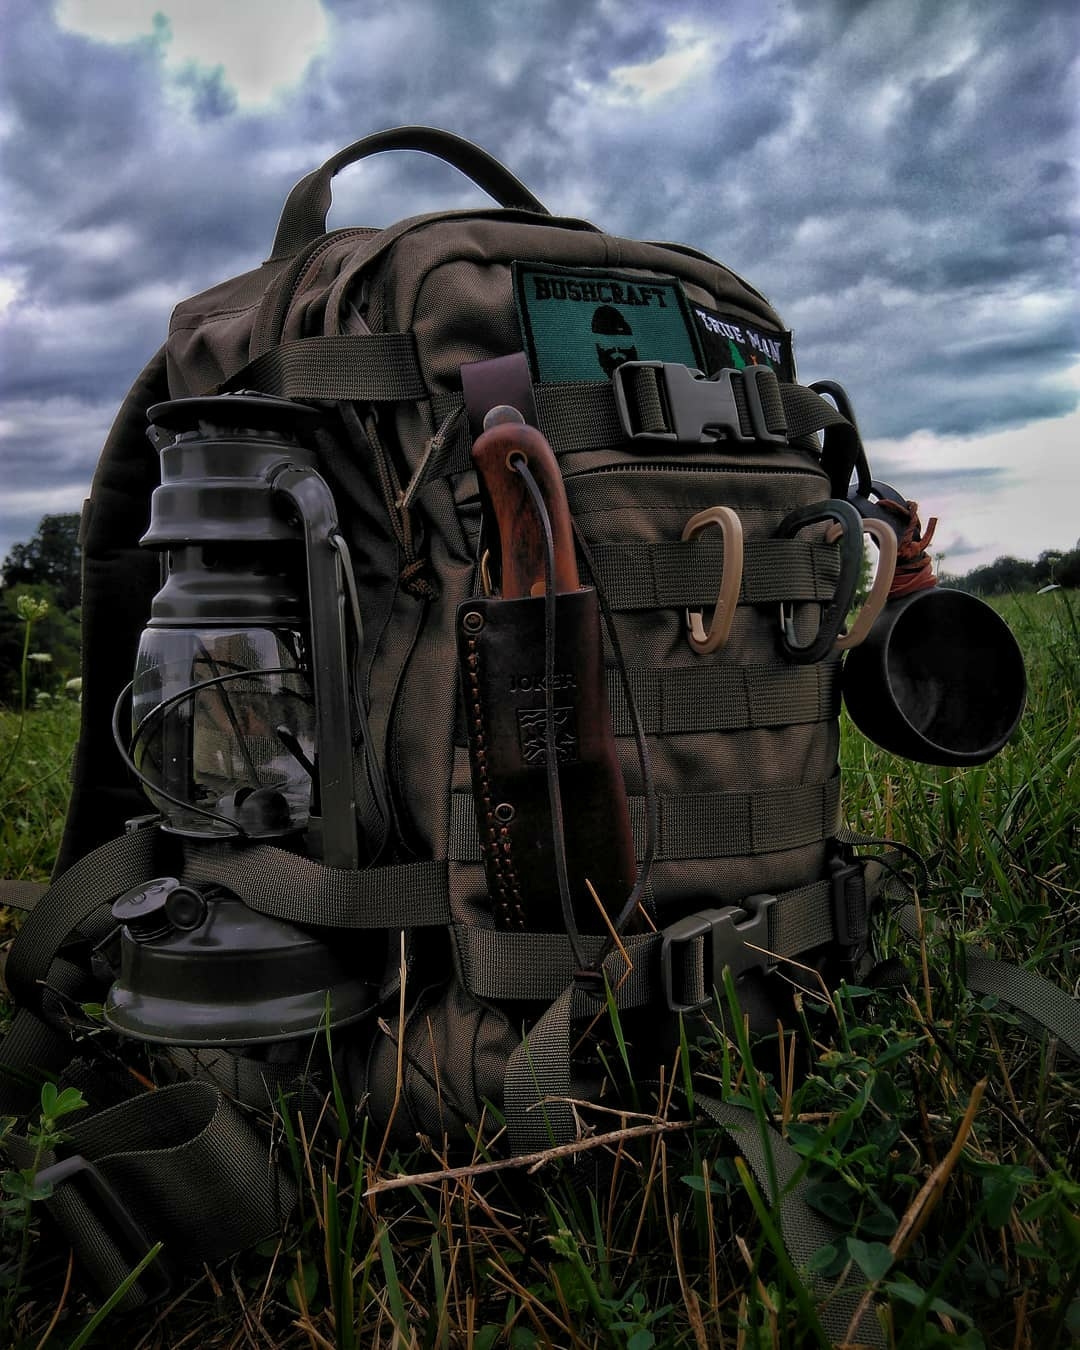 backpack loaded with gear